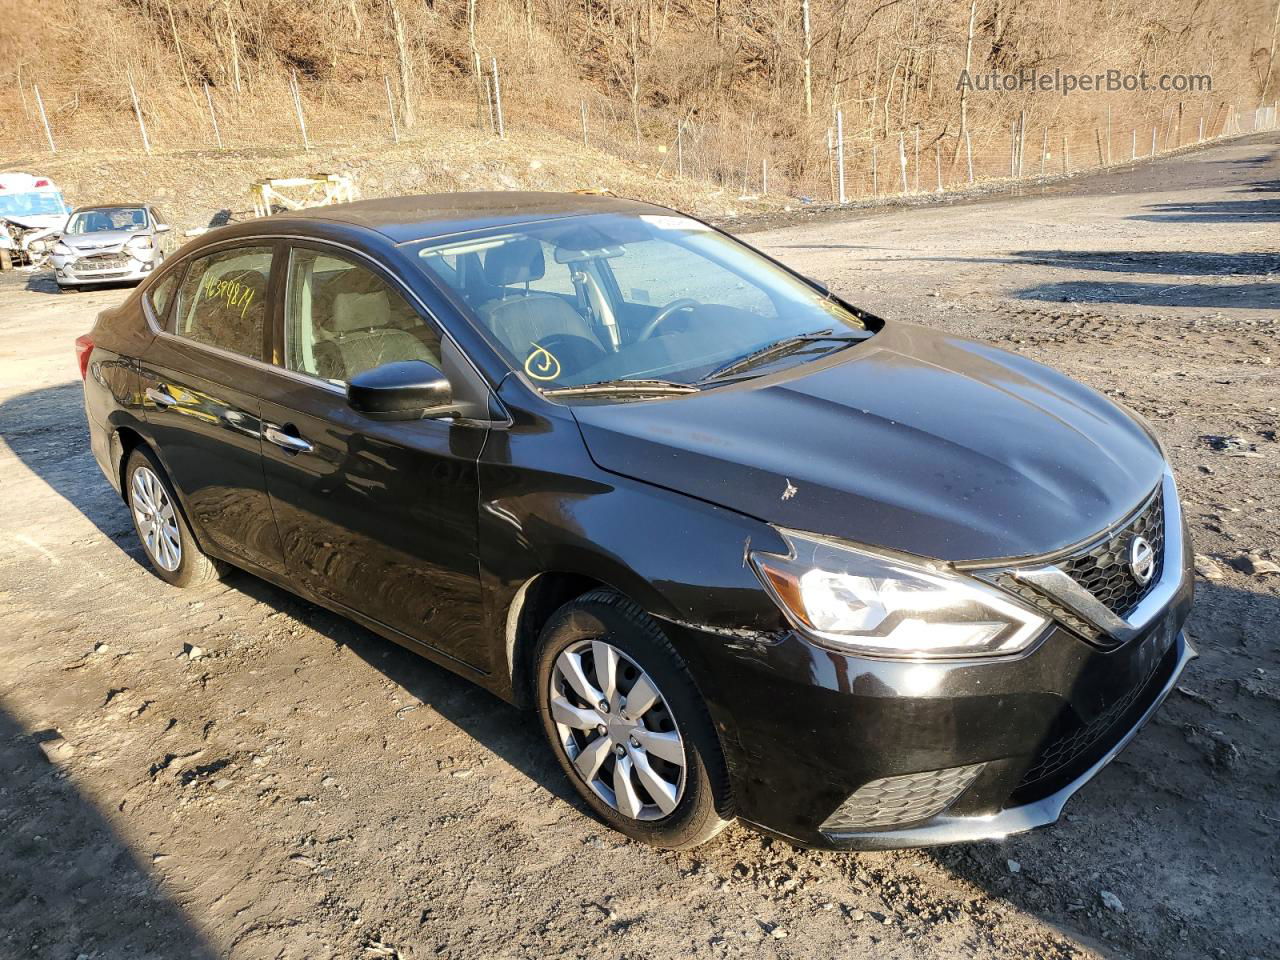 2016 Nissan Sentra S Black vin: 3N1AB7APXGY309500